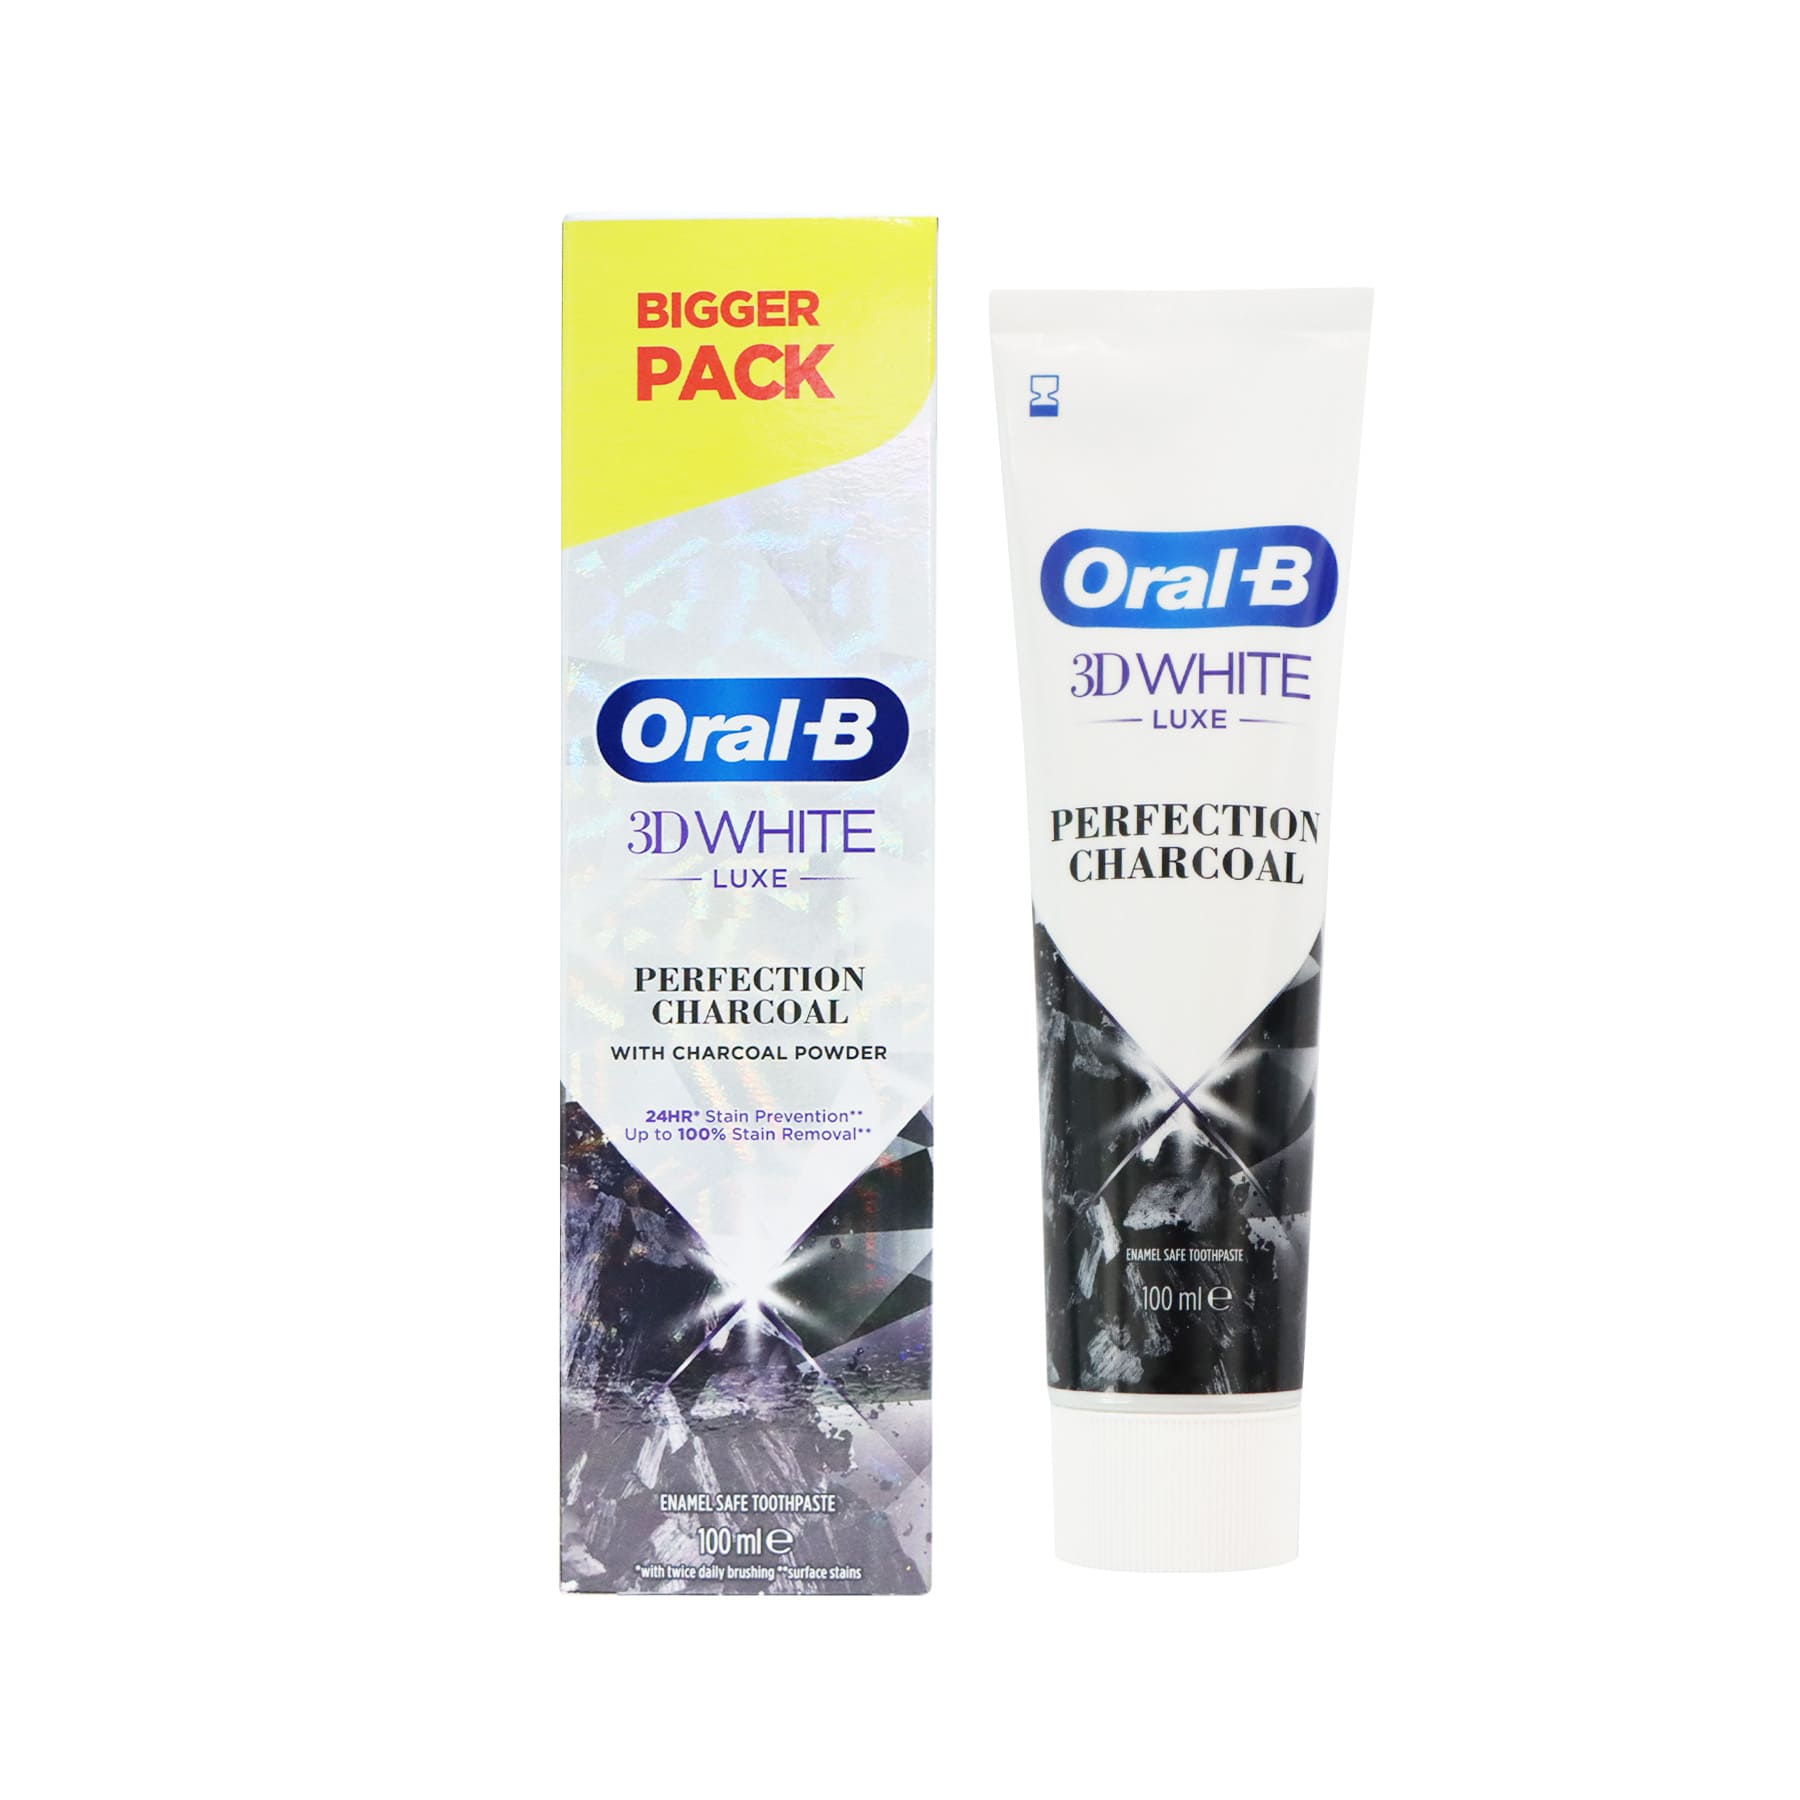 Oral-B 3D White Luxe Perfection Charcoal Toothpaste 100ml x 2